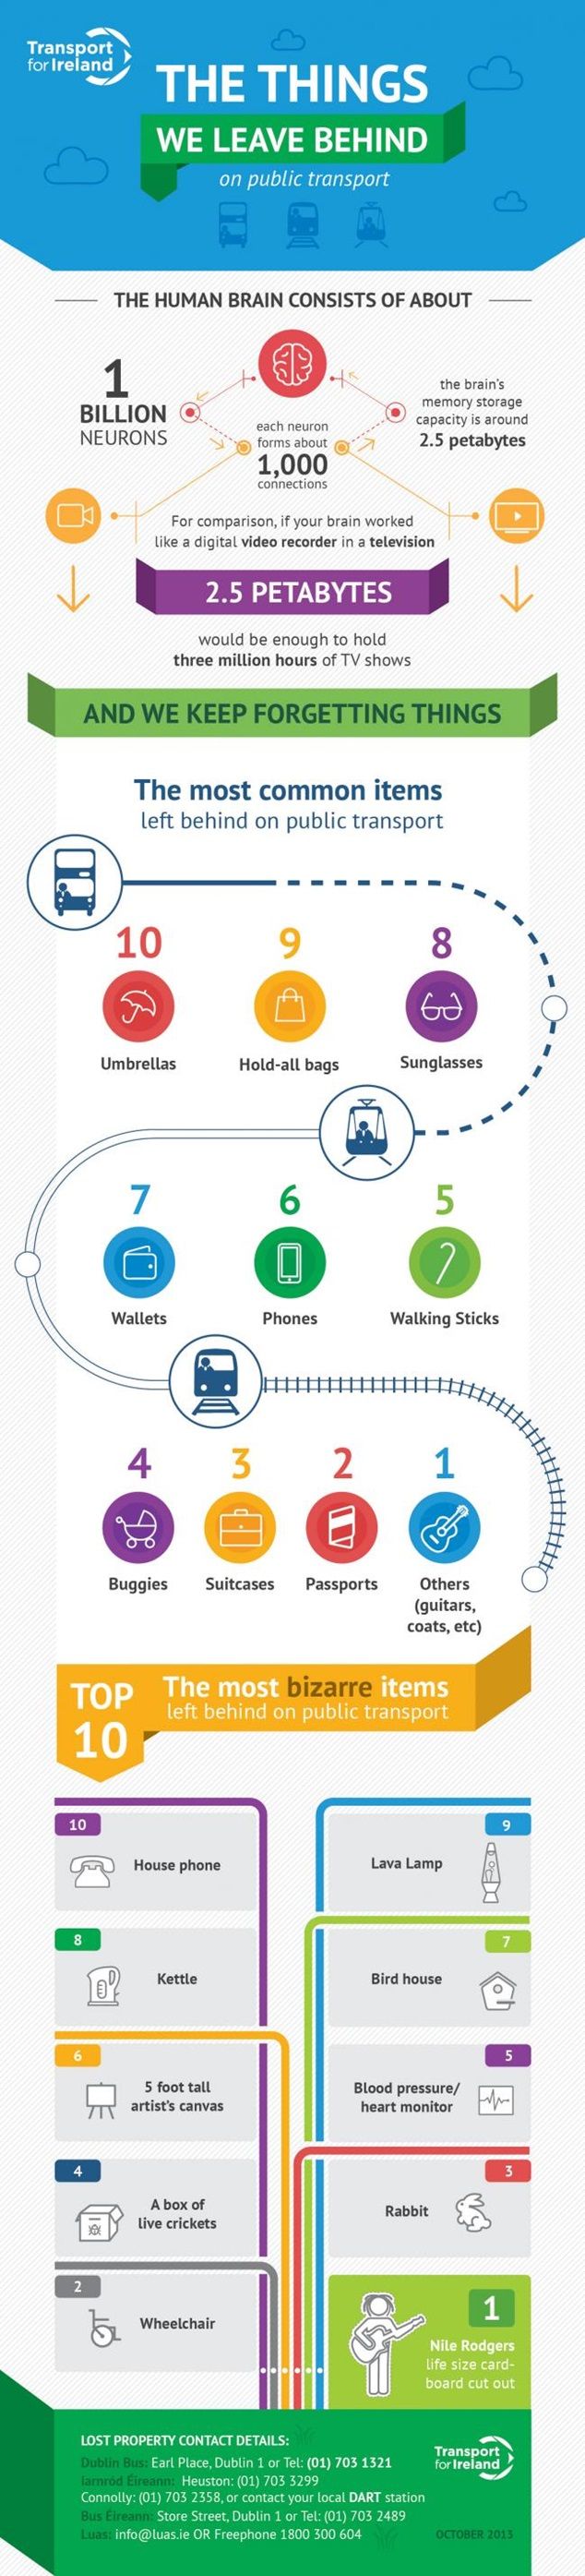 Transport for Ireland infographic